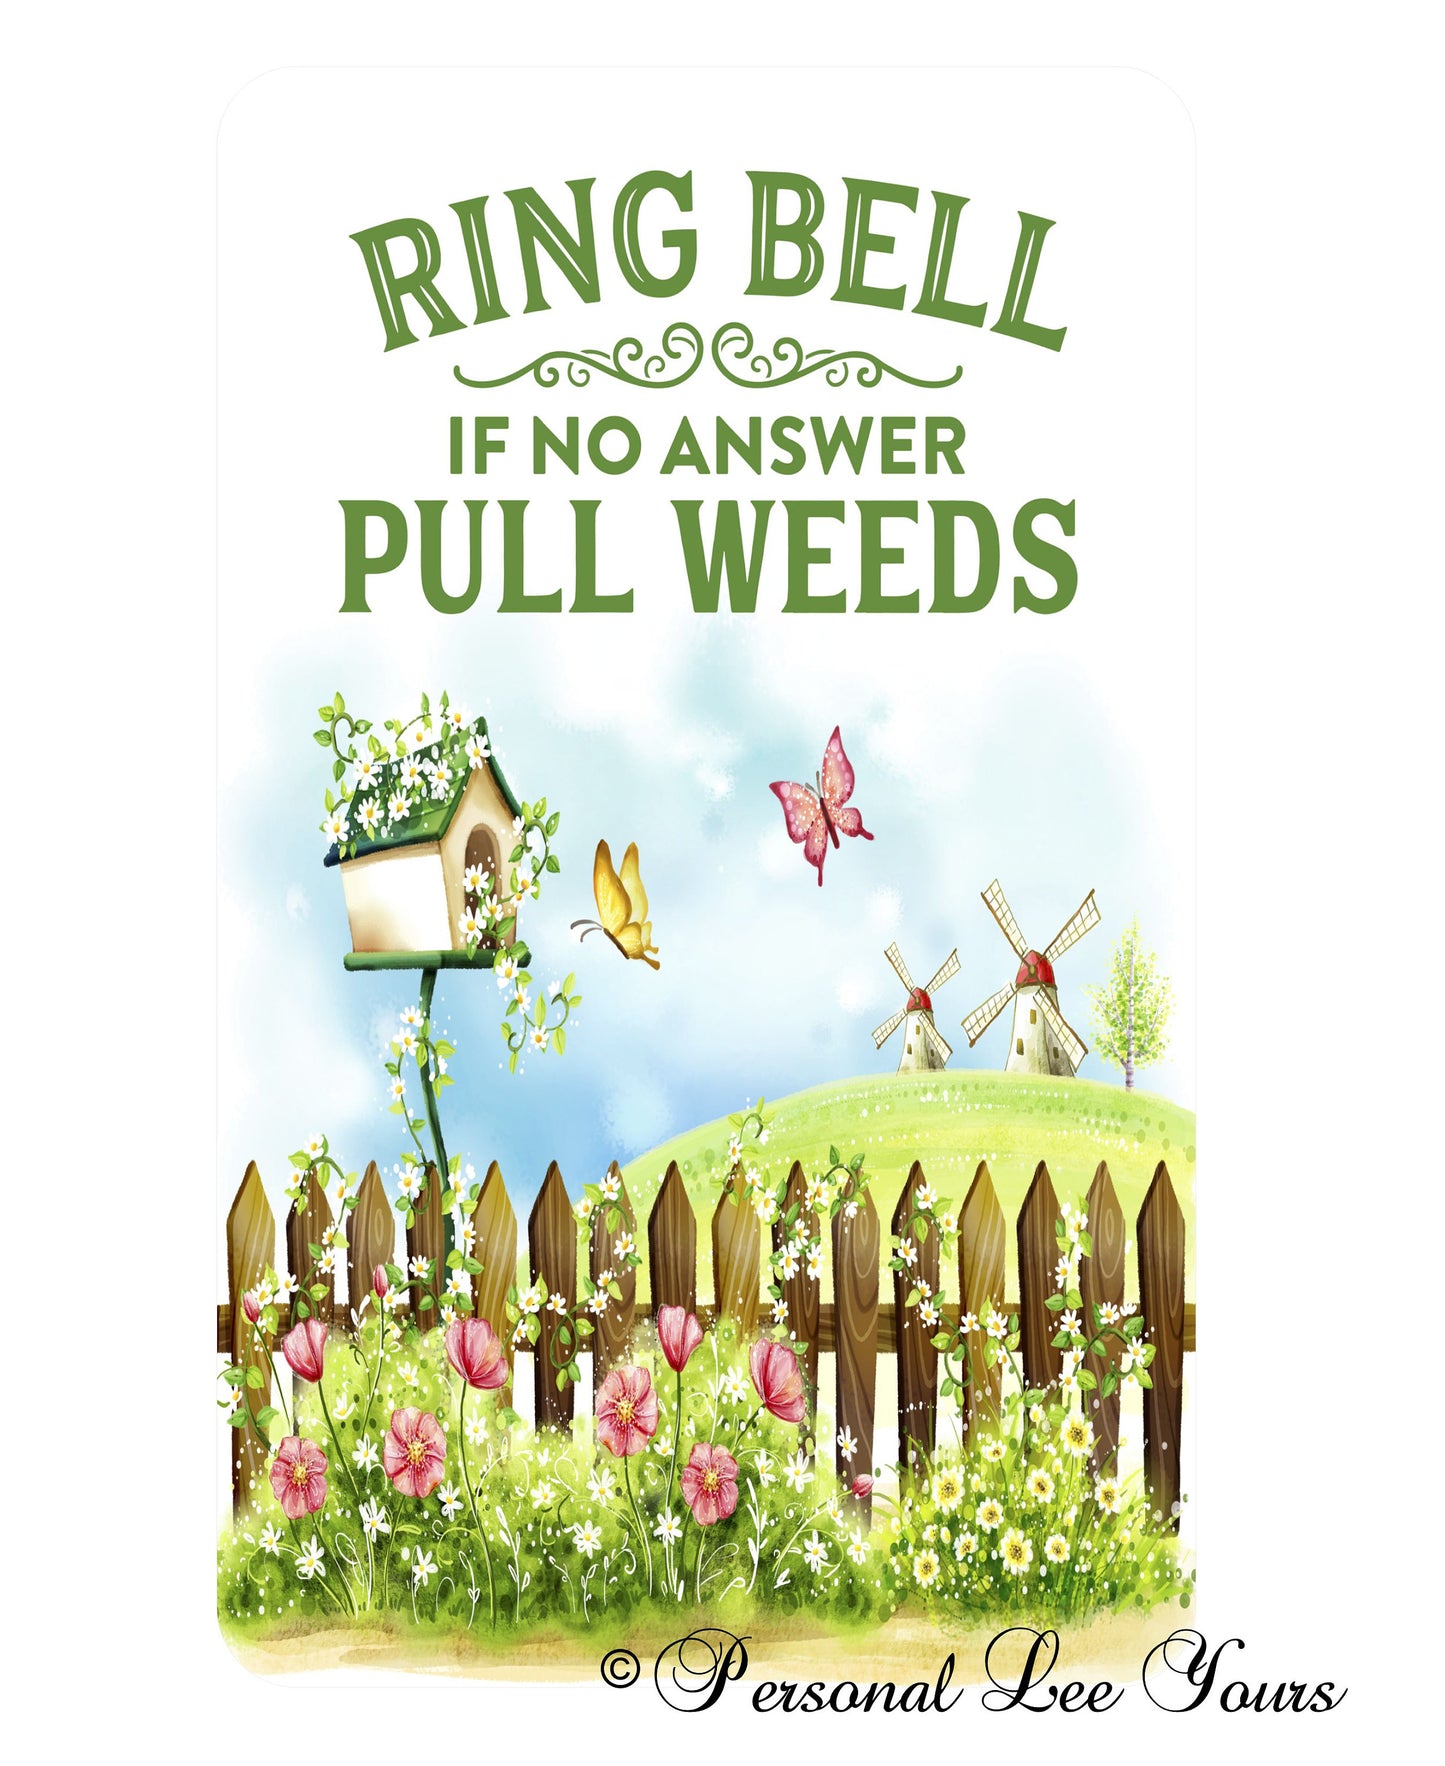 Wreath Signs * Ring Bell, If No Answer Pull Weeds * 3 Sizes * Lightweight Metal